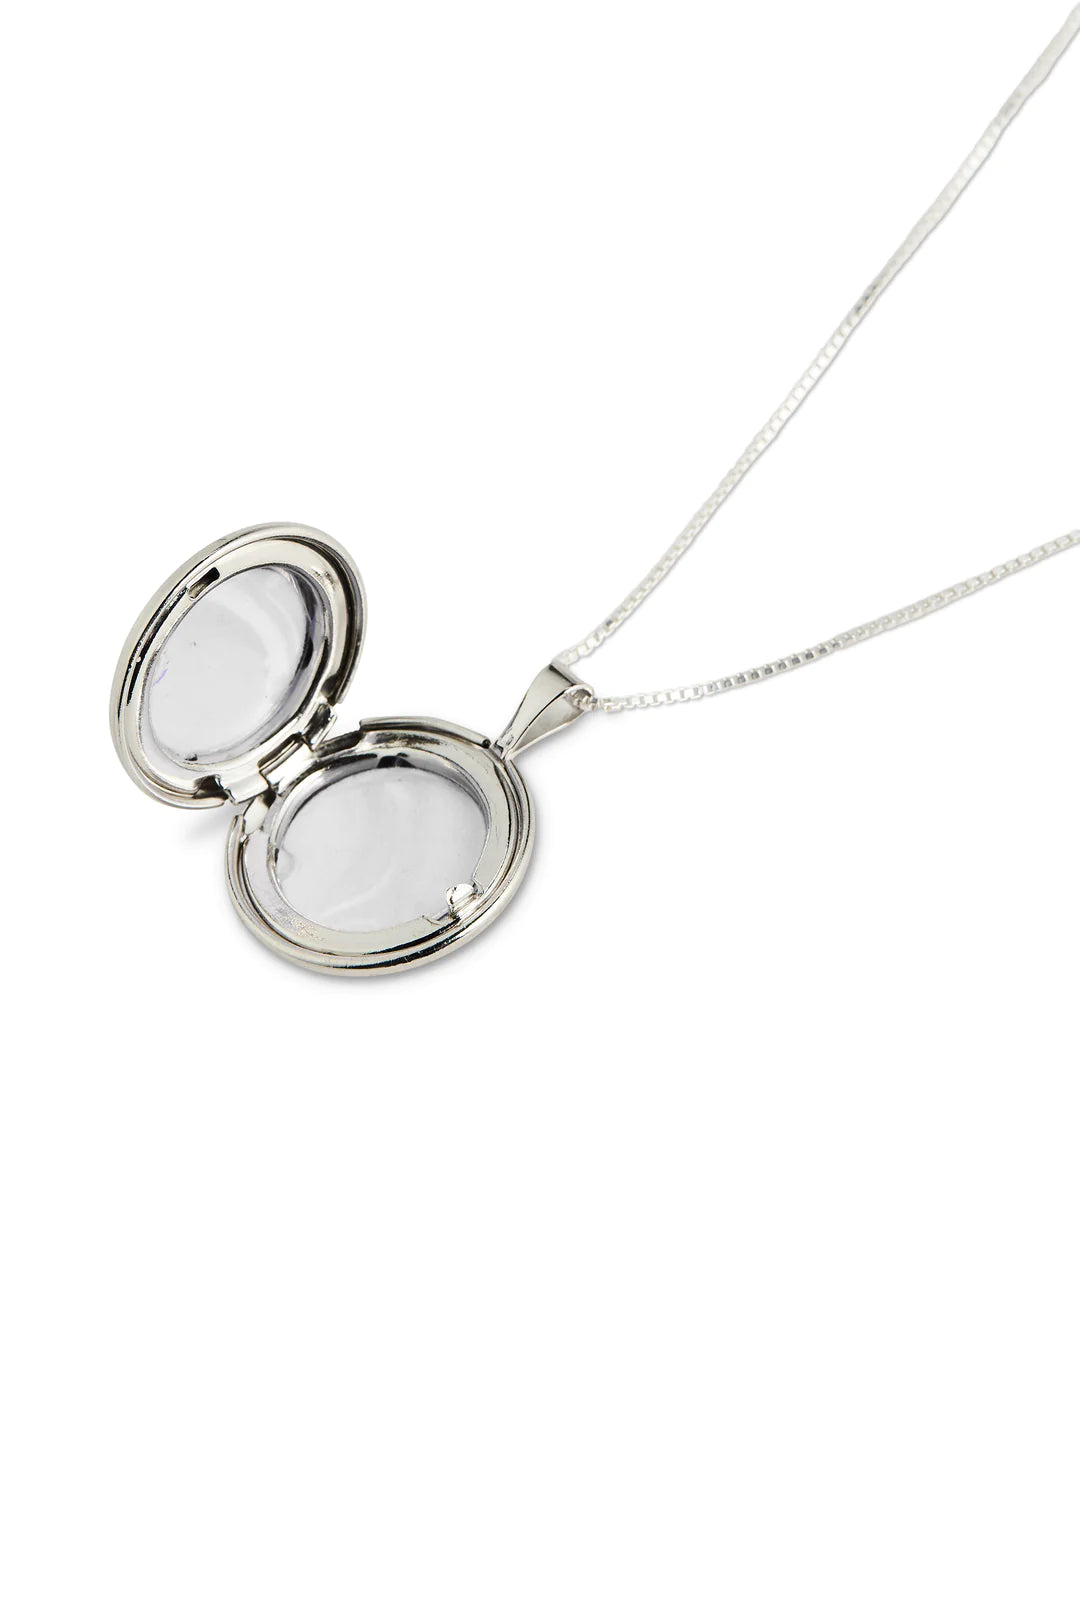 Classic Round Locket Necklace - Silver